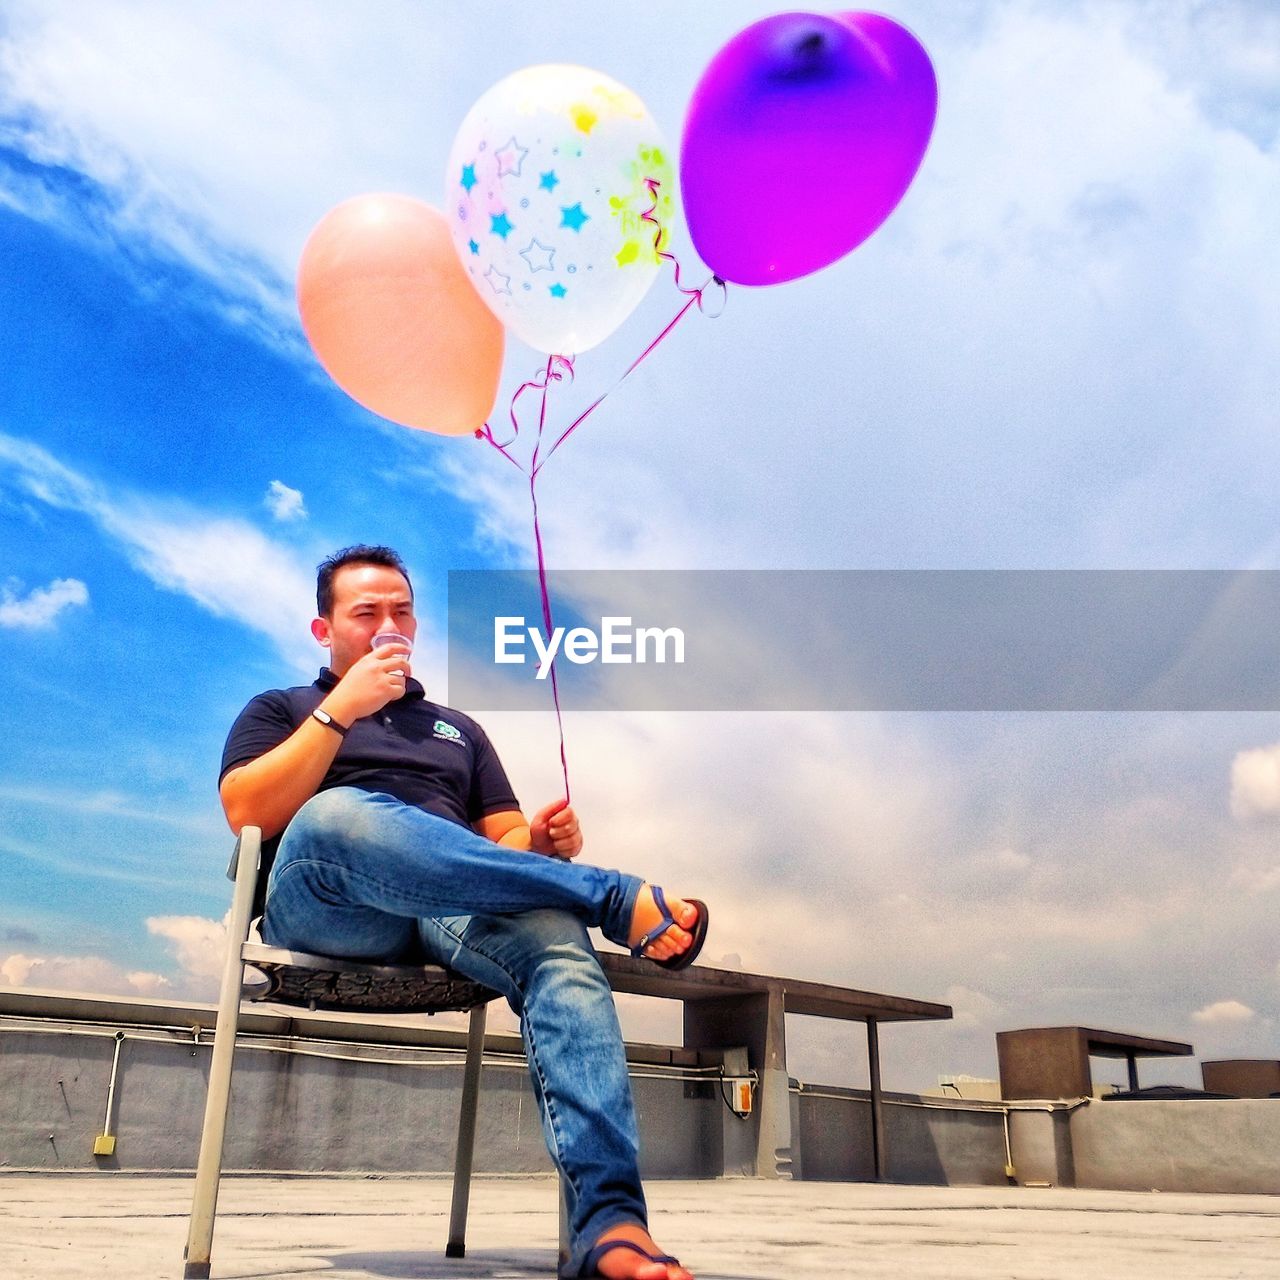 LOW ANGLE VIEW OF MAN SITTING ON BALLOONS